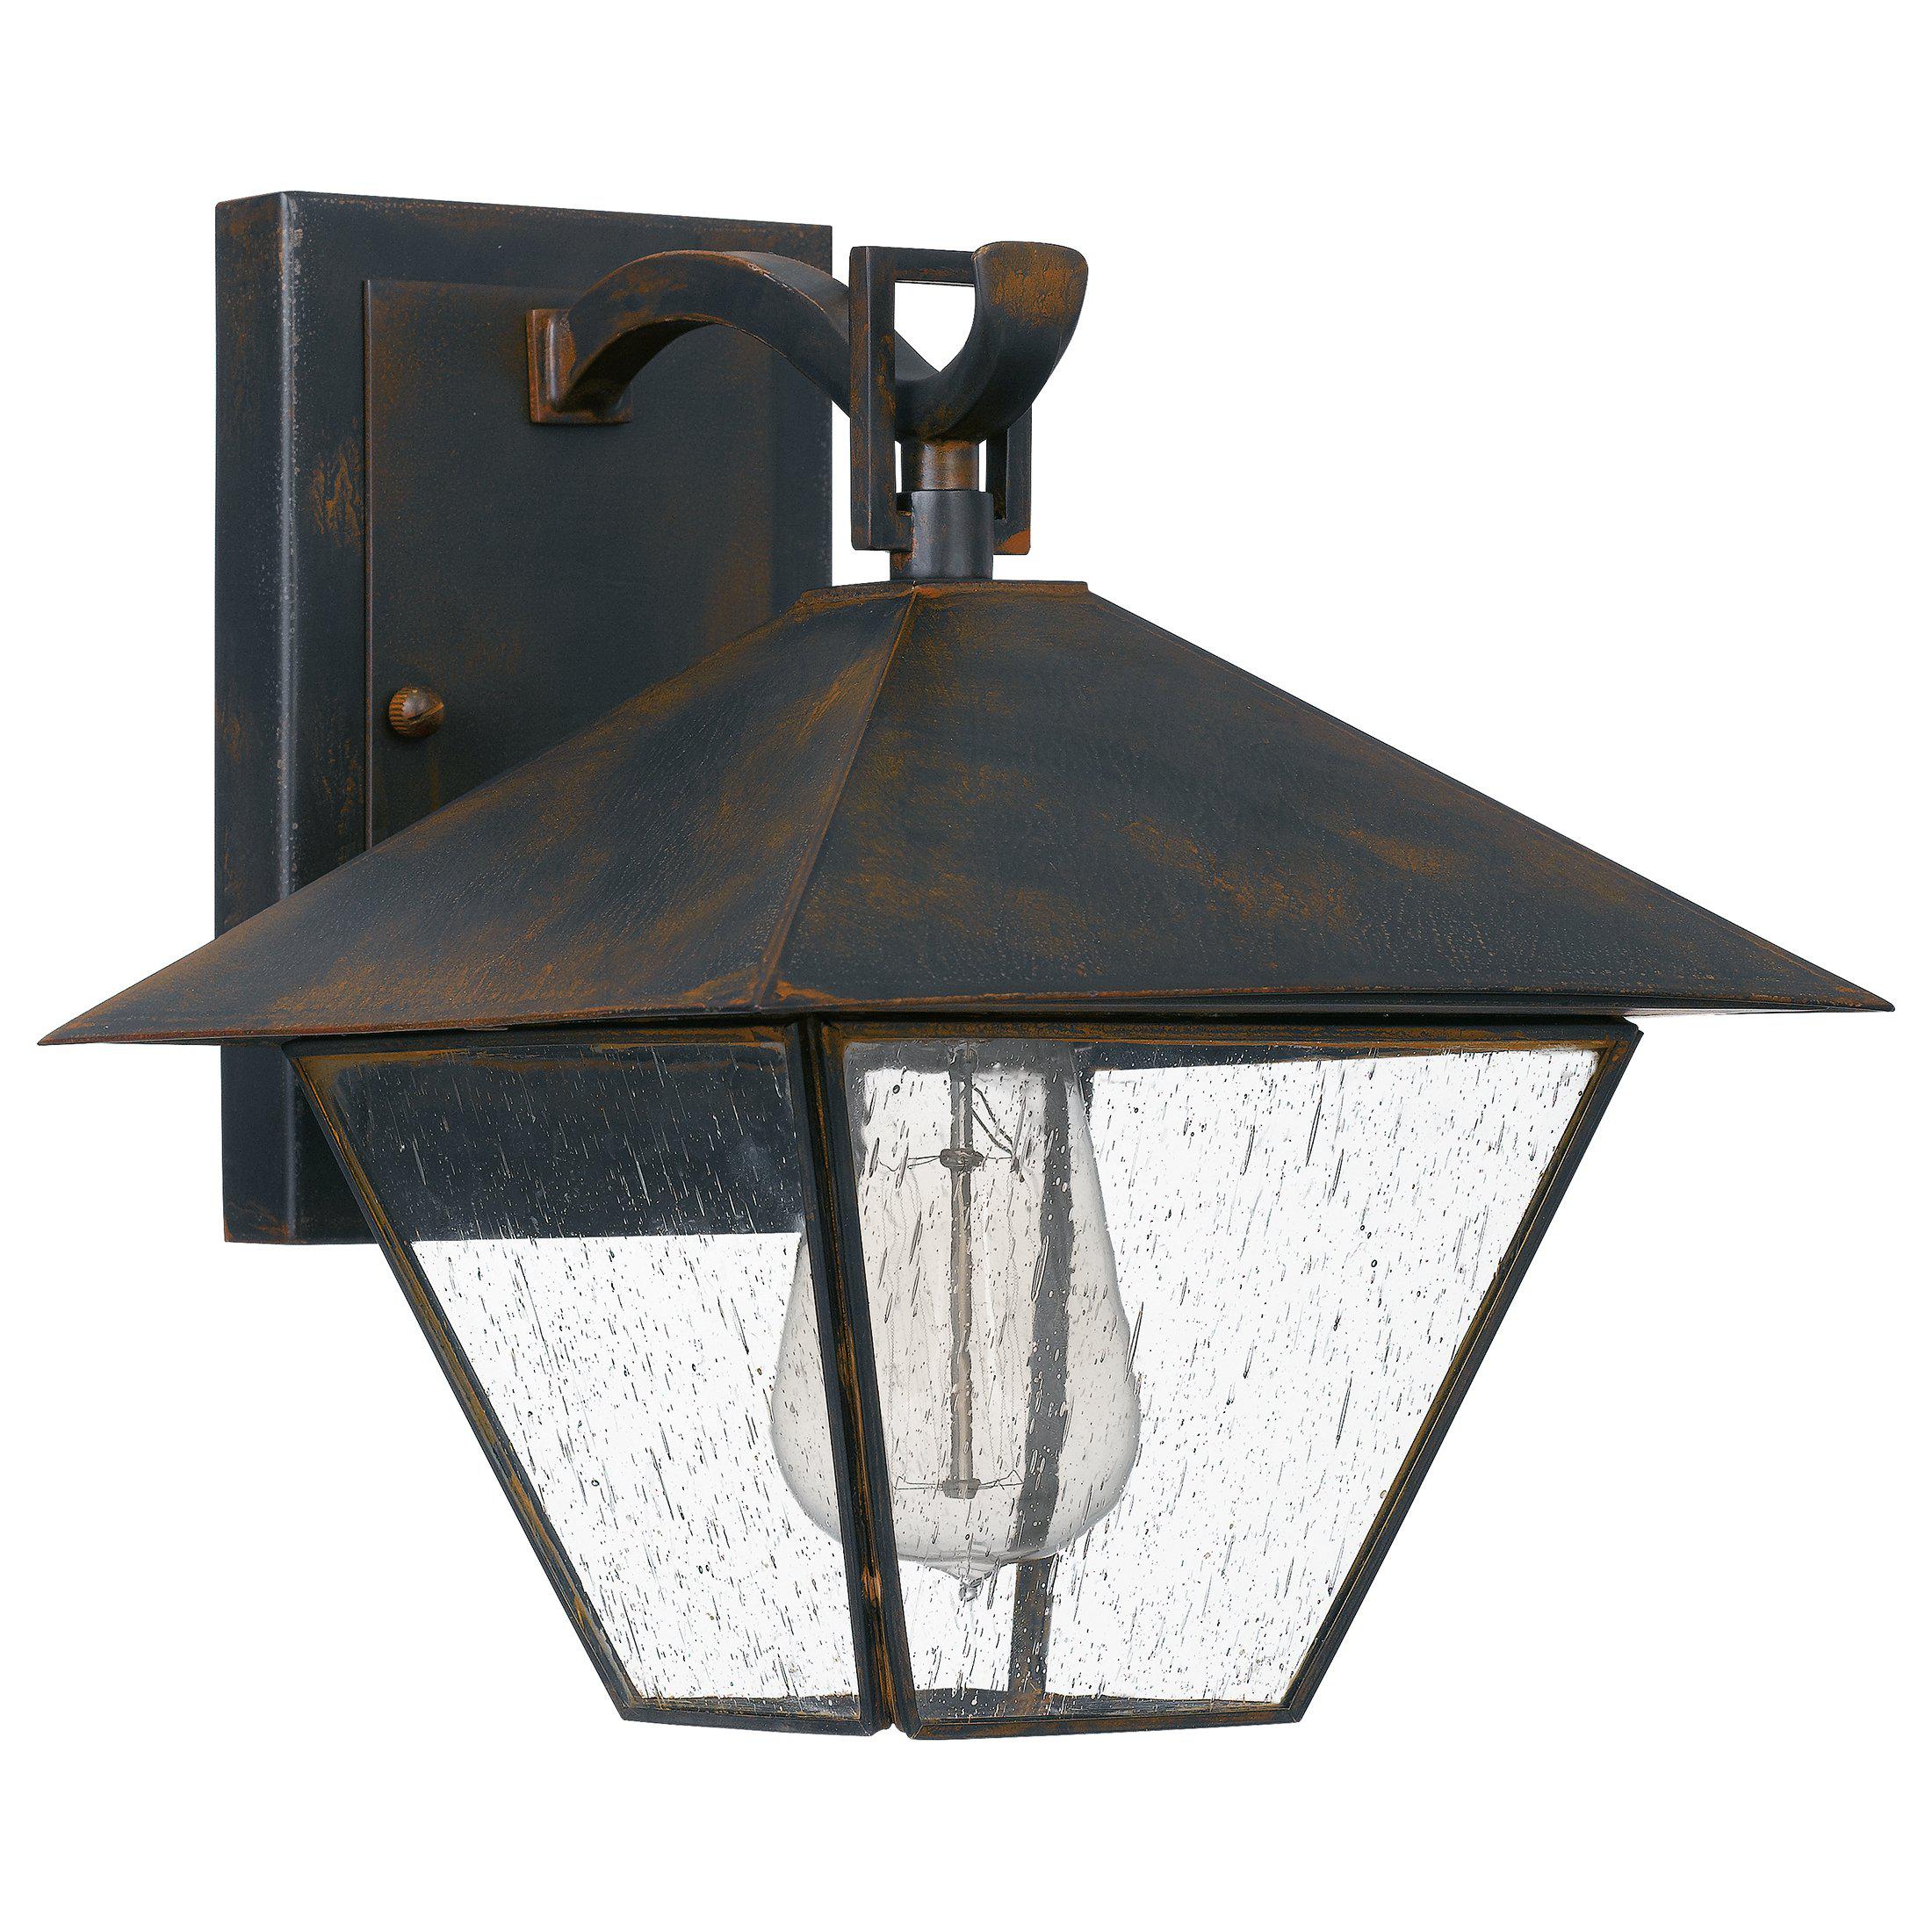 Quoizel Corporal Outdoor Lantern, Small